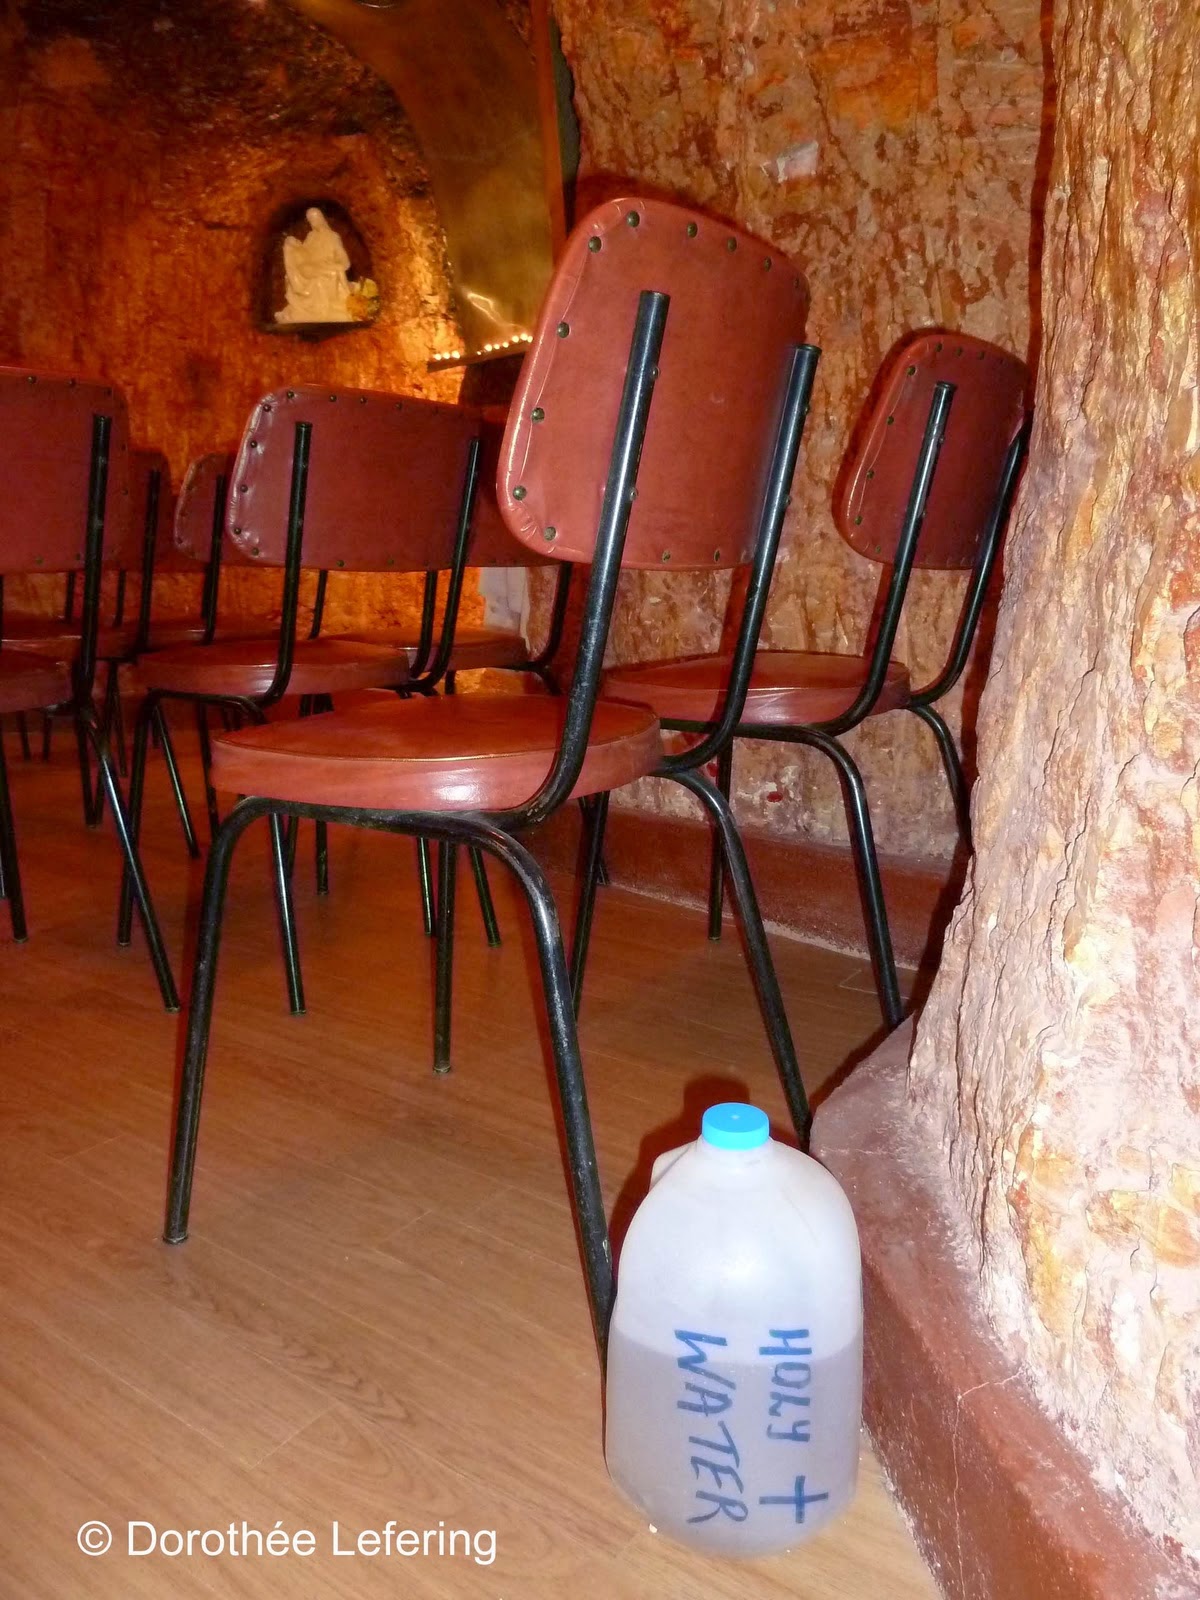 A plastic canister labelled with Holy Water, next to brown chairs with a figure of a madonna and the stone walls of the church as a background